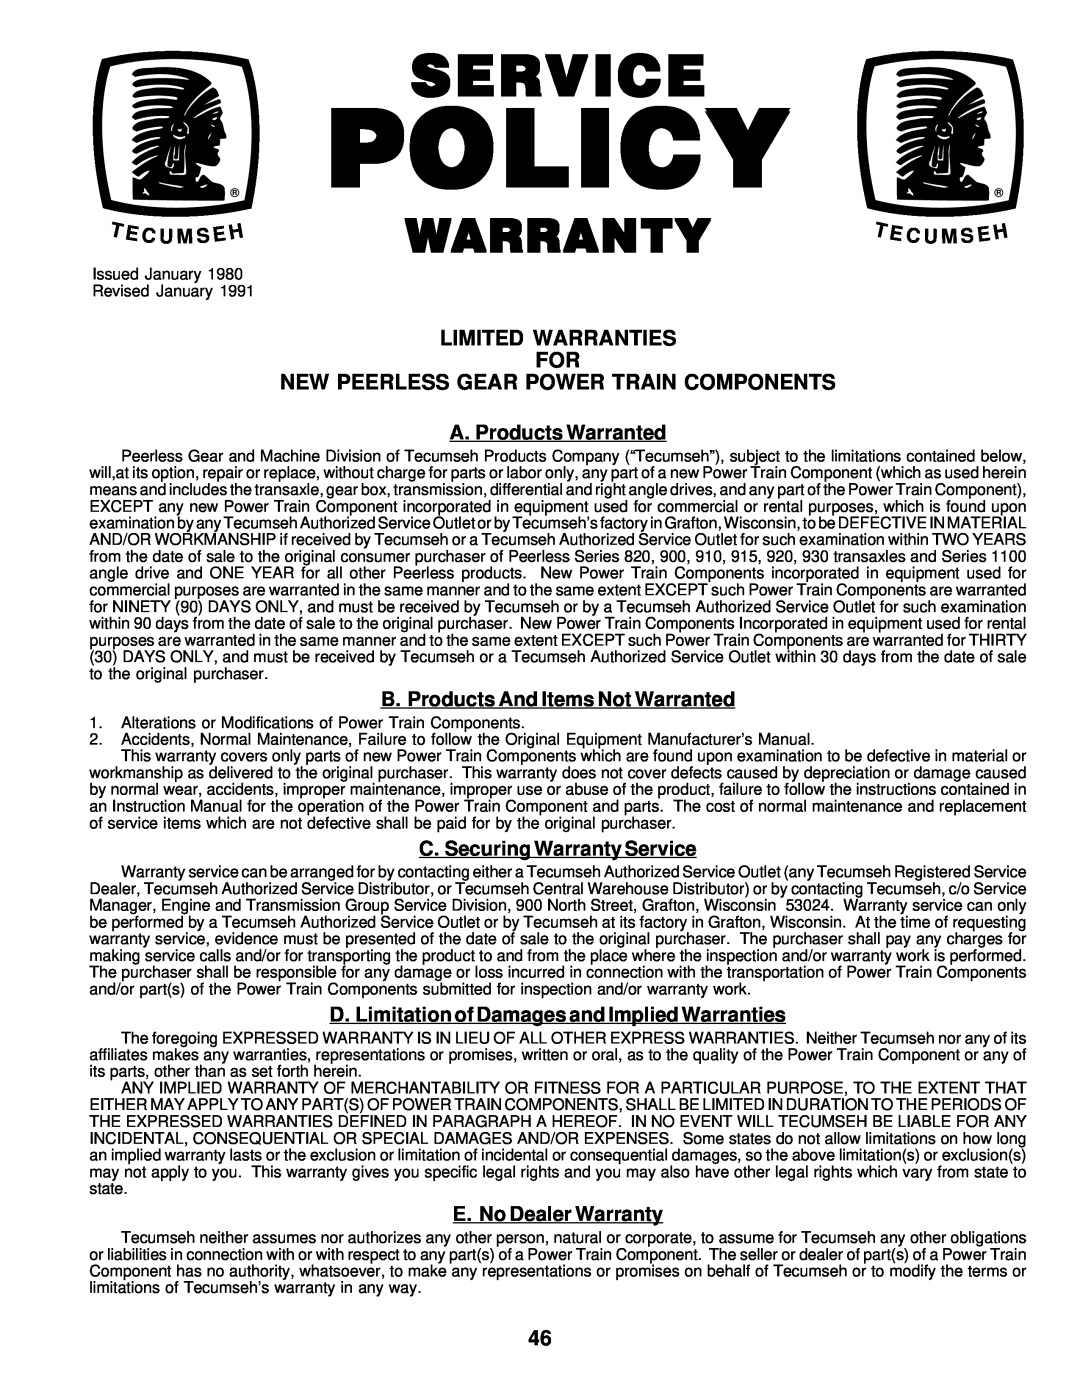 Poulan PR18542STC Warranty, Limited Warranties For New Peerless Gear Power Train Components, T E C U M S Eh, Policy 